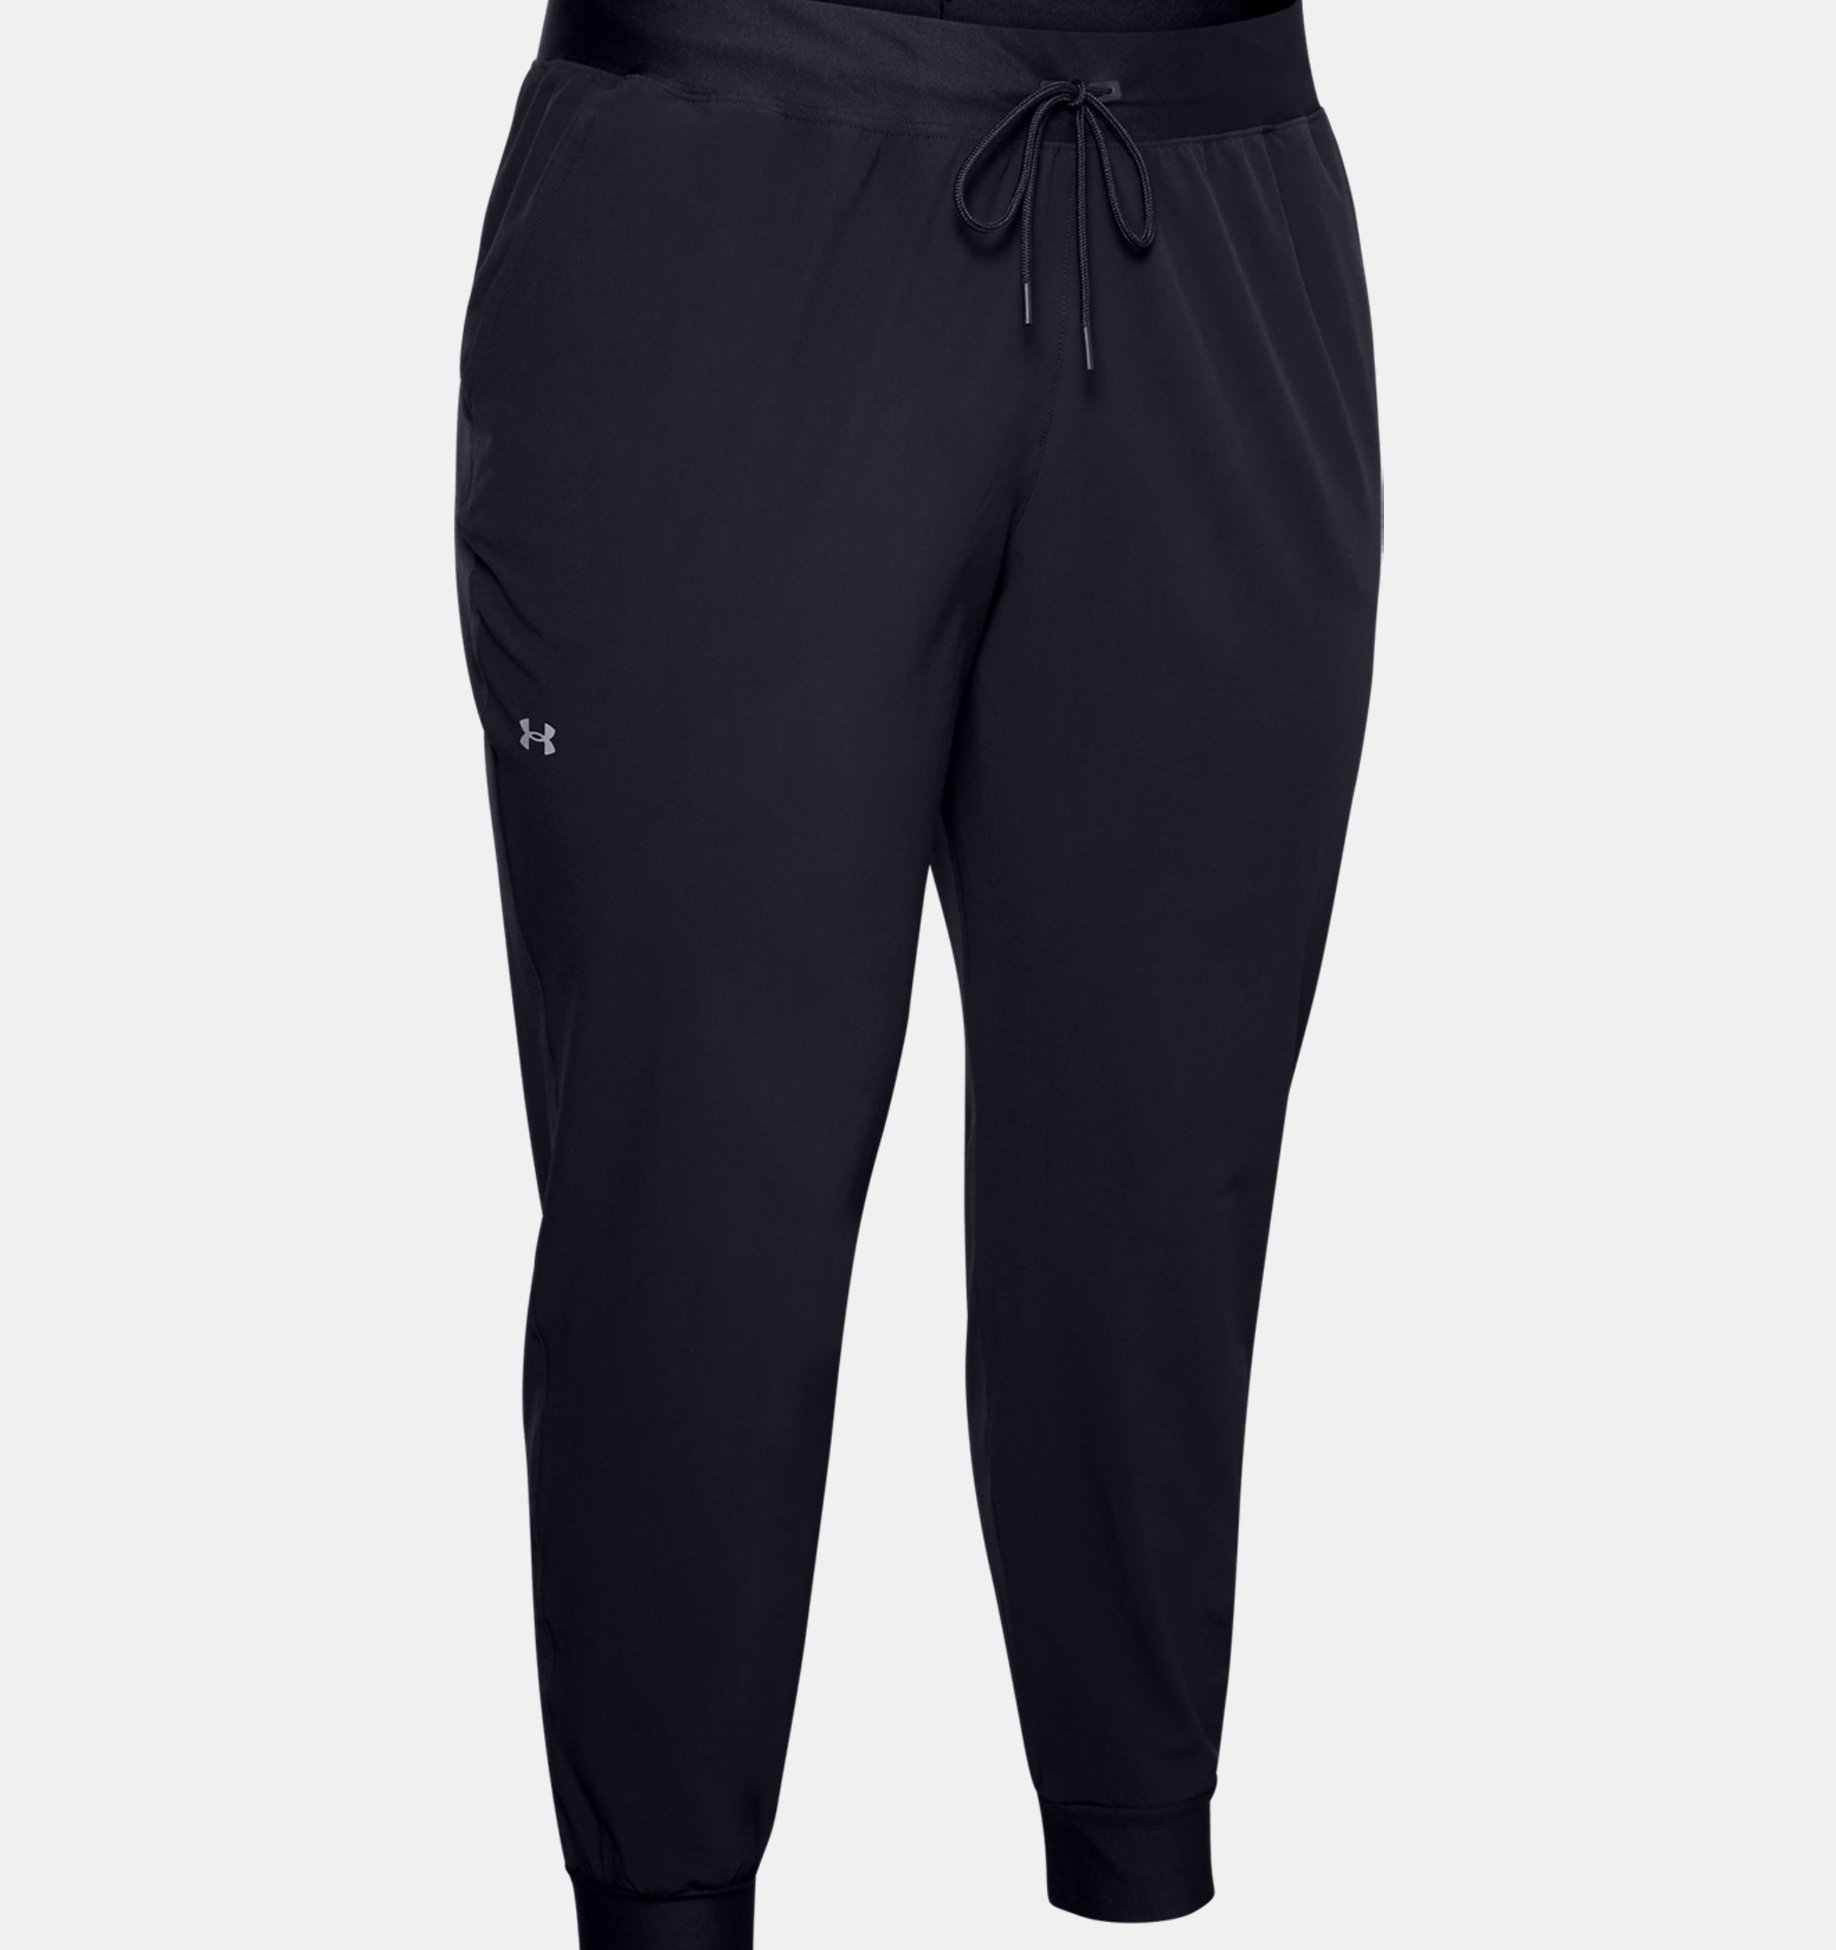 https://underarmour.scene7.com/is/image/Underarmour/PS1354418-001_HF?rp=standard-0pad|pdpZoomDesktop&scl=0.72&fmt=jpg&qlt=85&resMode=sharp2&cache=on,on&bgc=f0f0f0&wid=1836&hei=1950&size=1500,1500